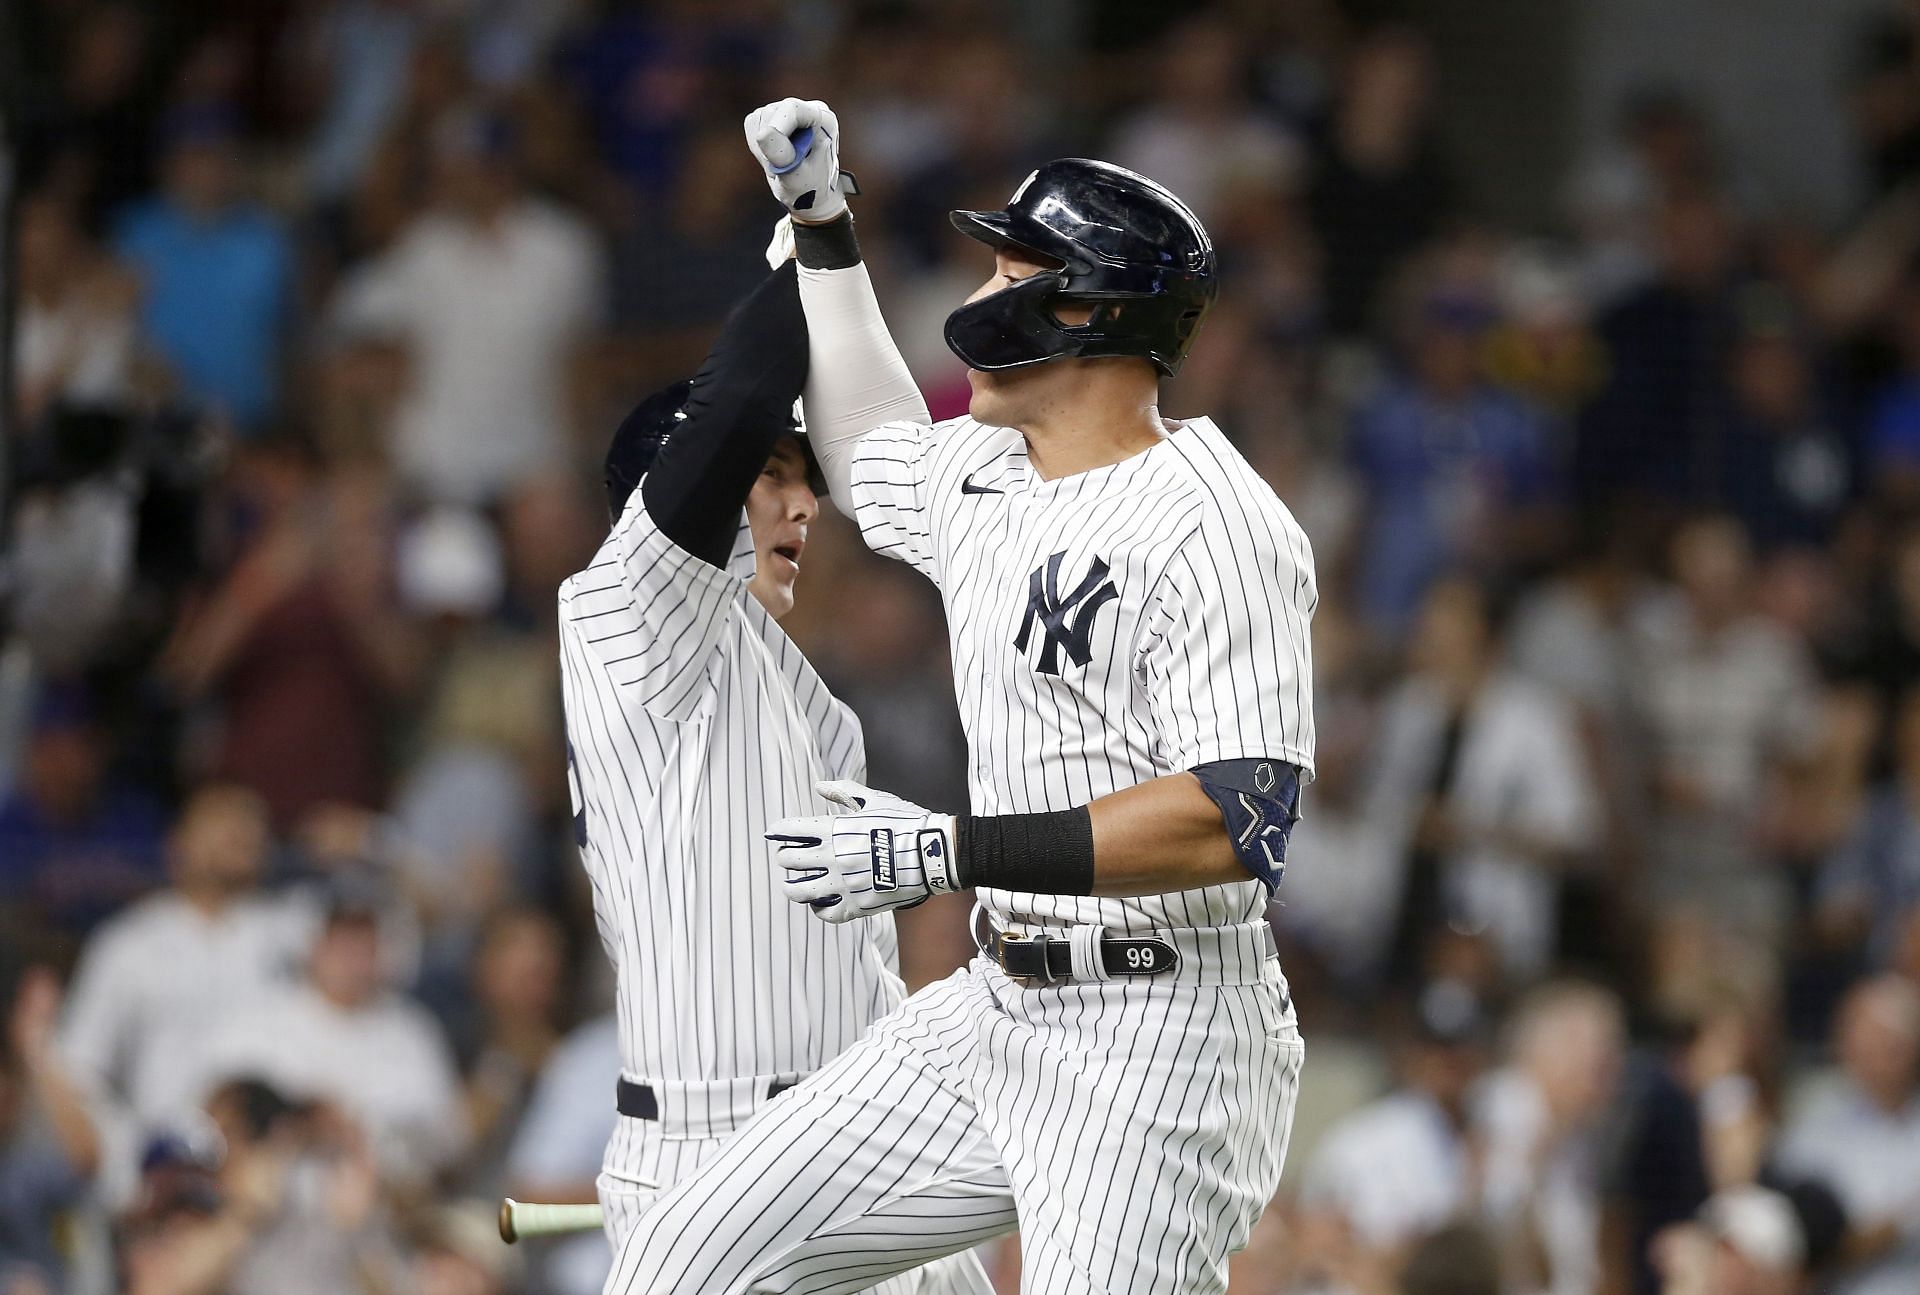 All Rise, twice! Yankees' Aaron Judge blasts two homers to beat